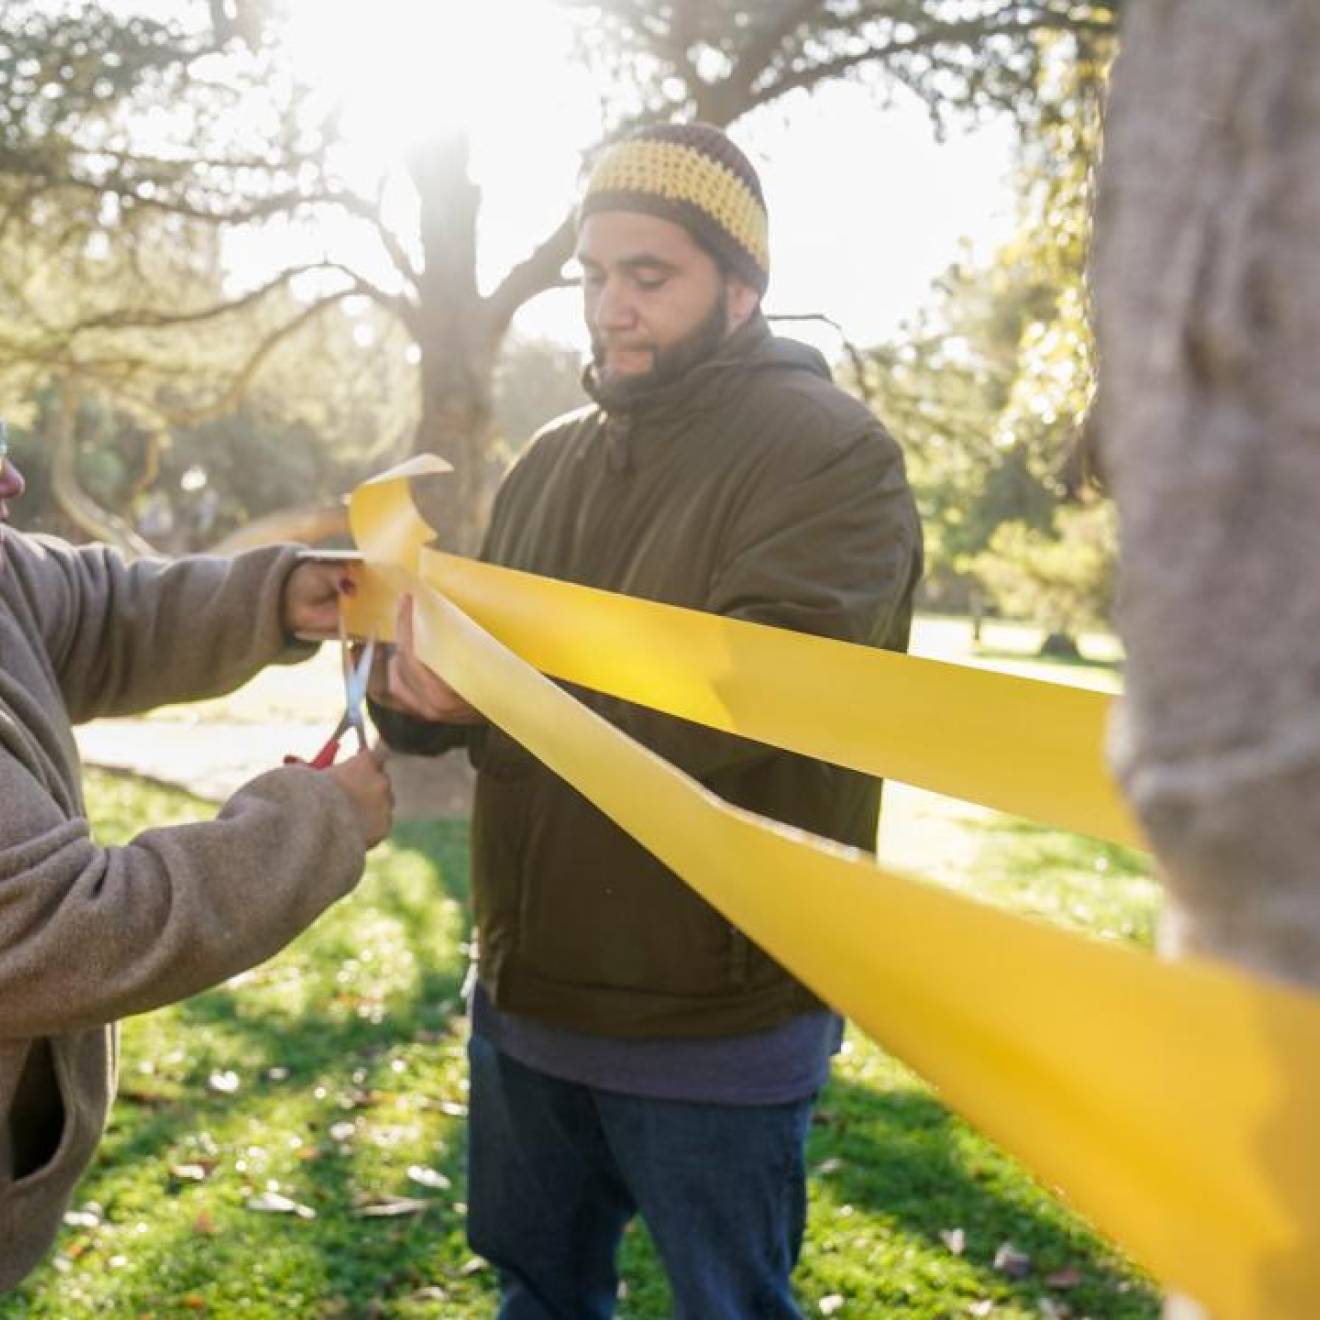 A woman cuts a long yellow ribbon tied to a tree a man is holding